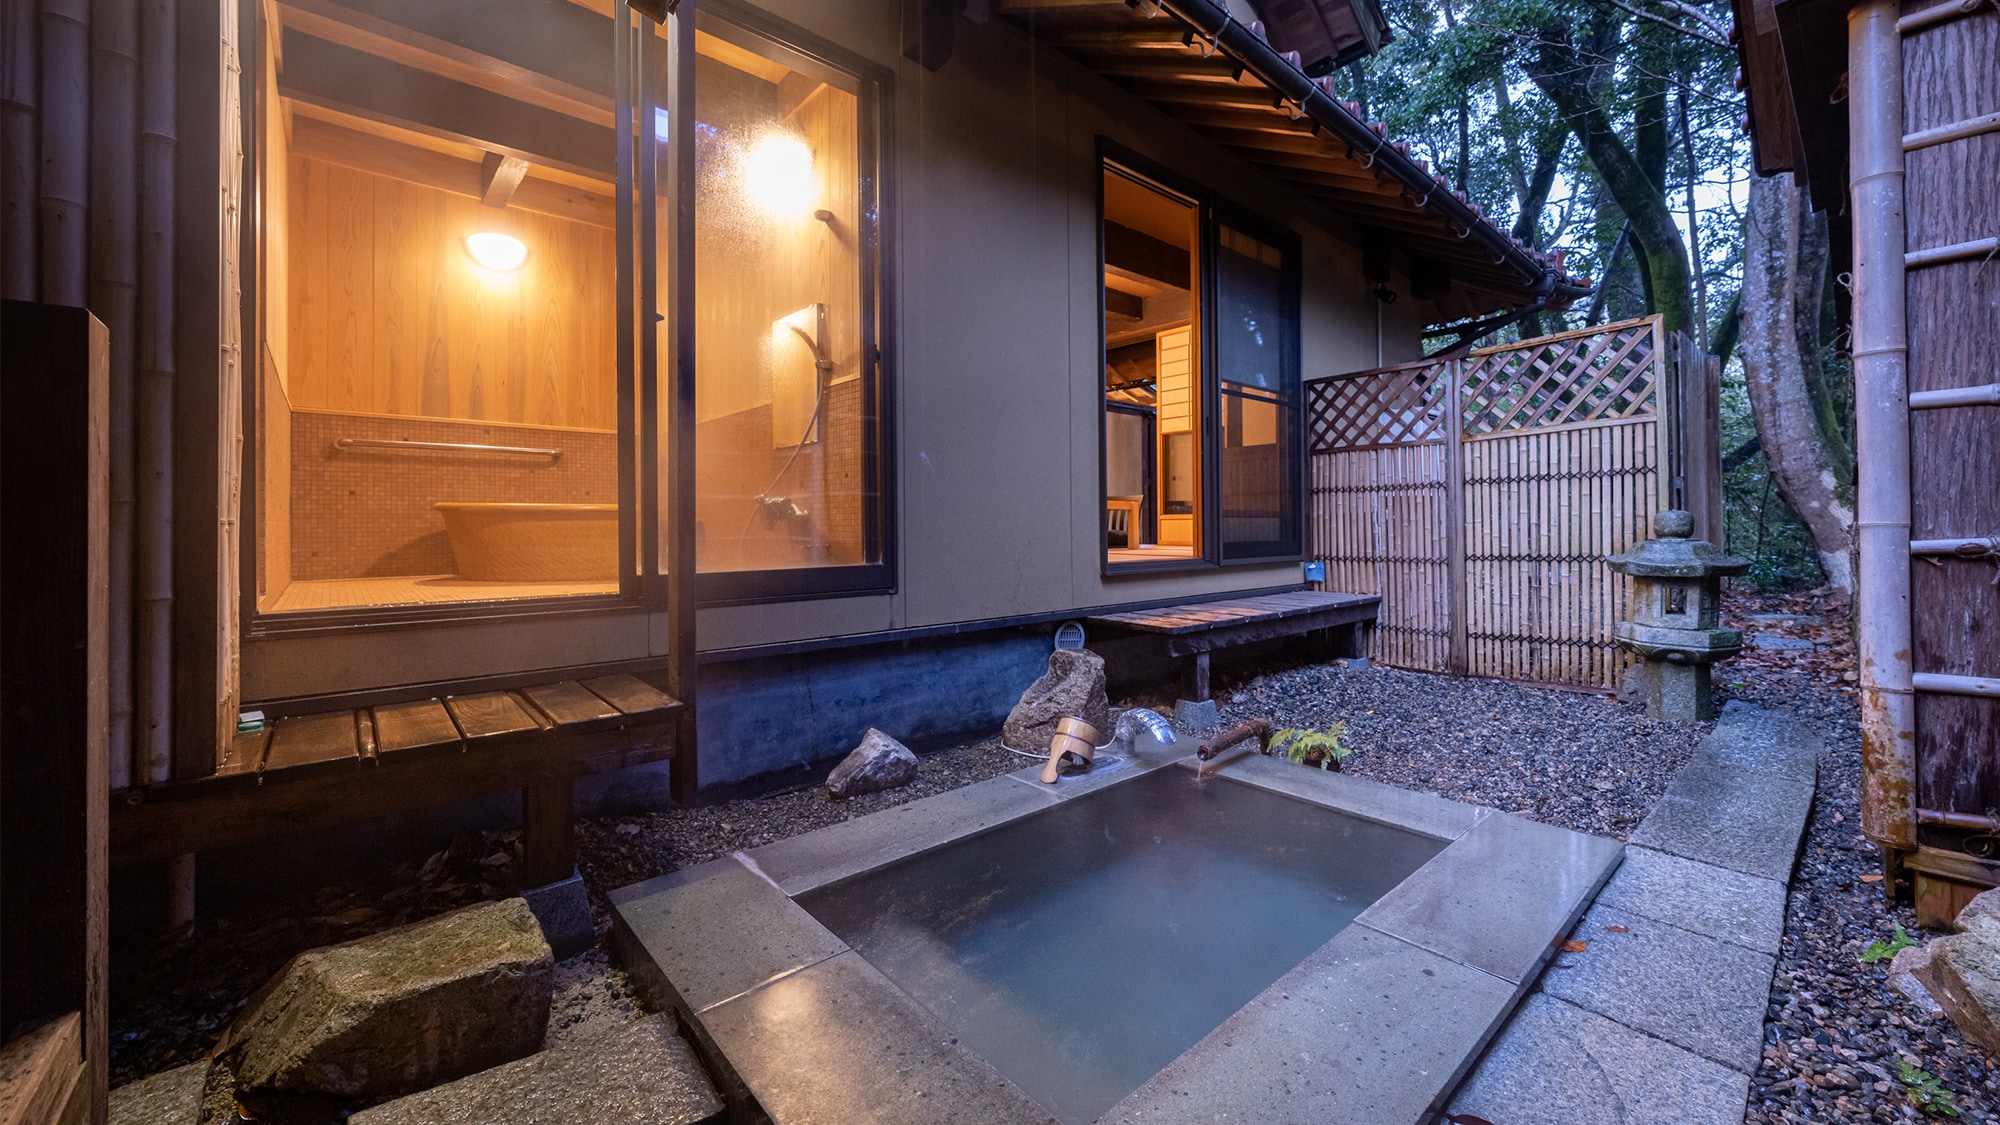 [Botan-with open-air bath] The best part of the guest room open-air bath is when you want.